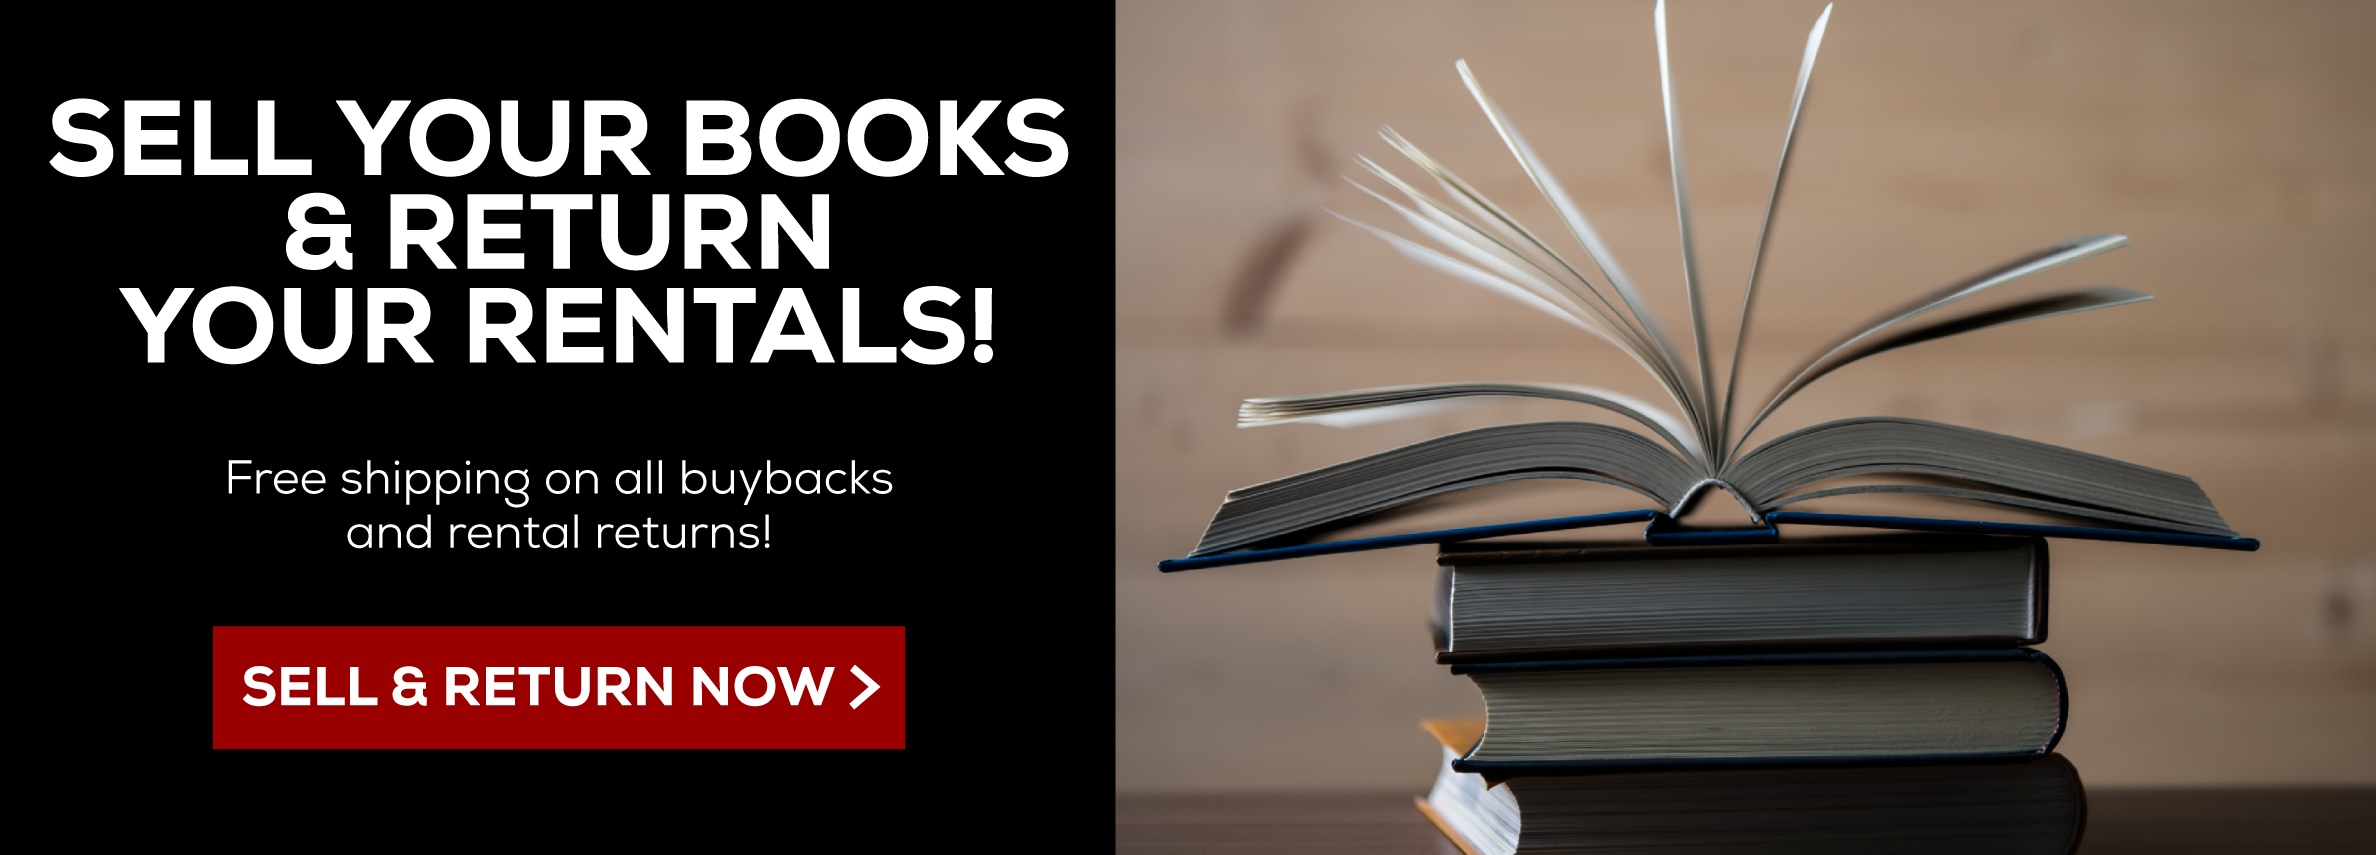 SELL YOUR BOOKS & RETURN YOUR RENTALS! Free shipping on all buybacks and rental returns! SELL & RETURN NOW >